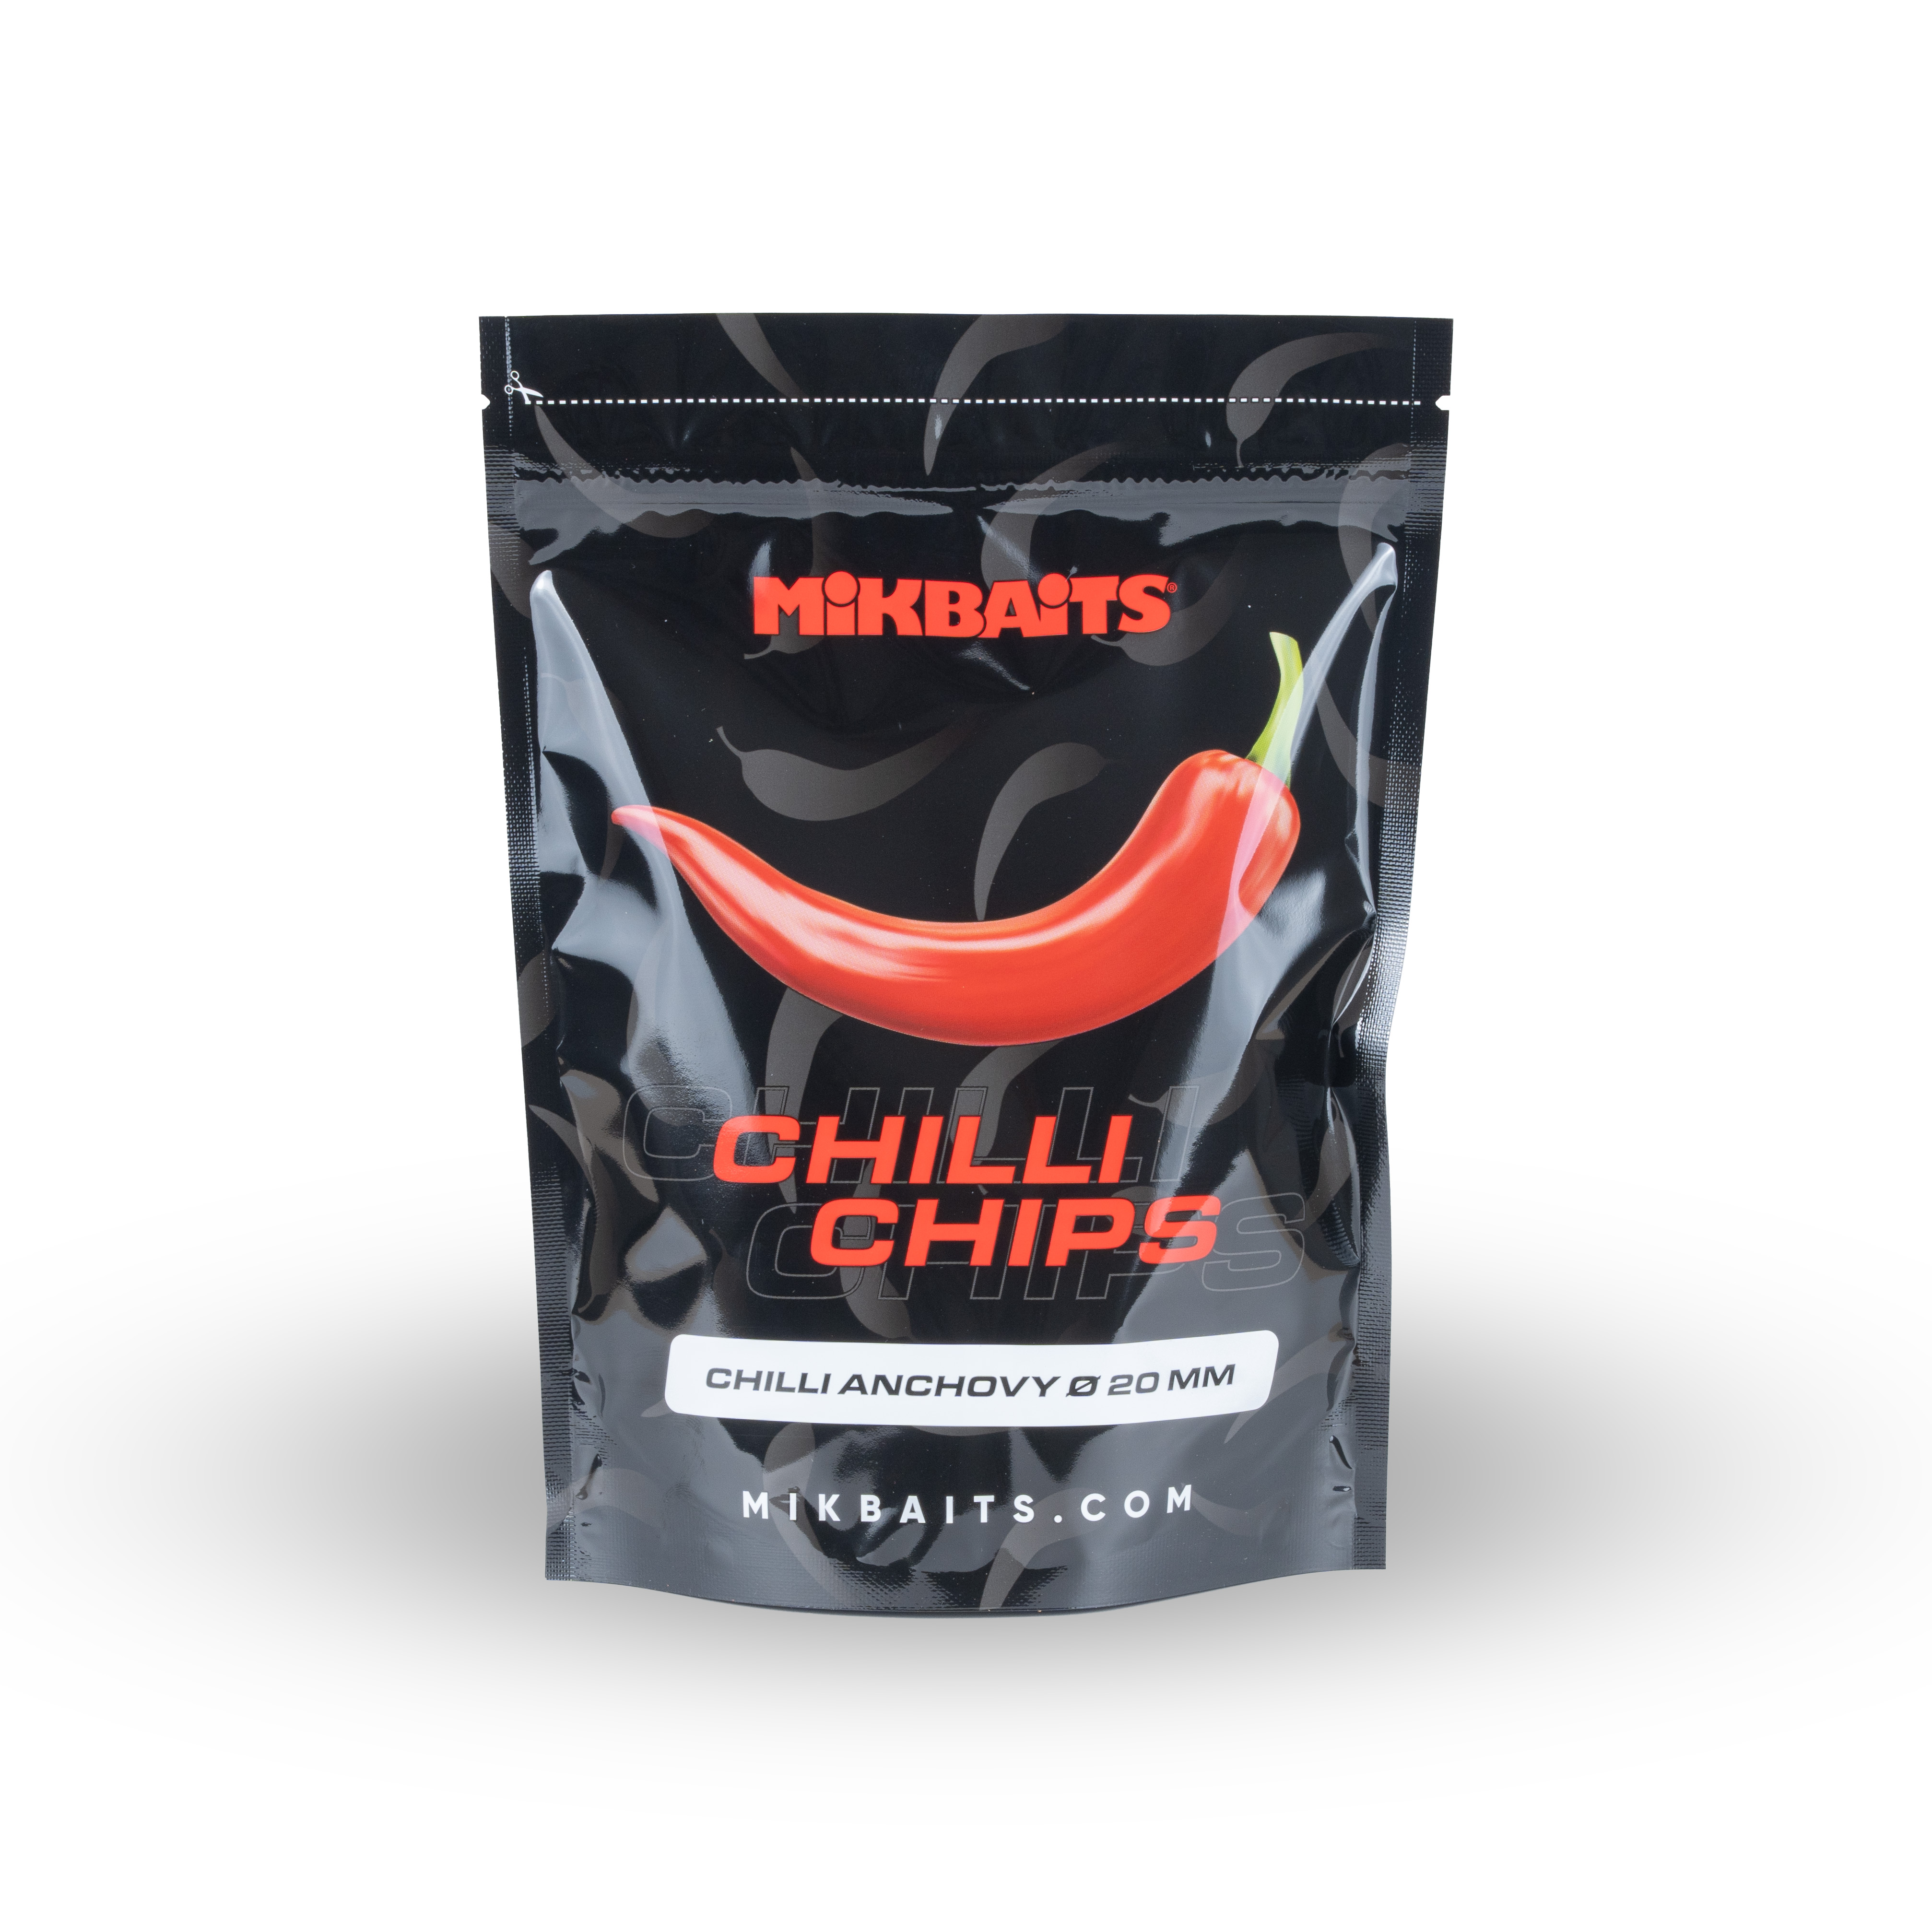 Mikbaits boilie Chilli Chips Chilli Anchovy 20mm Balení: 300g